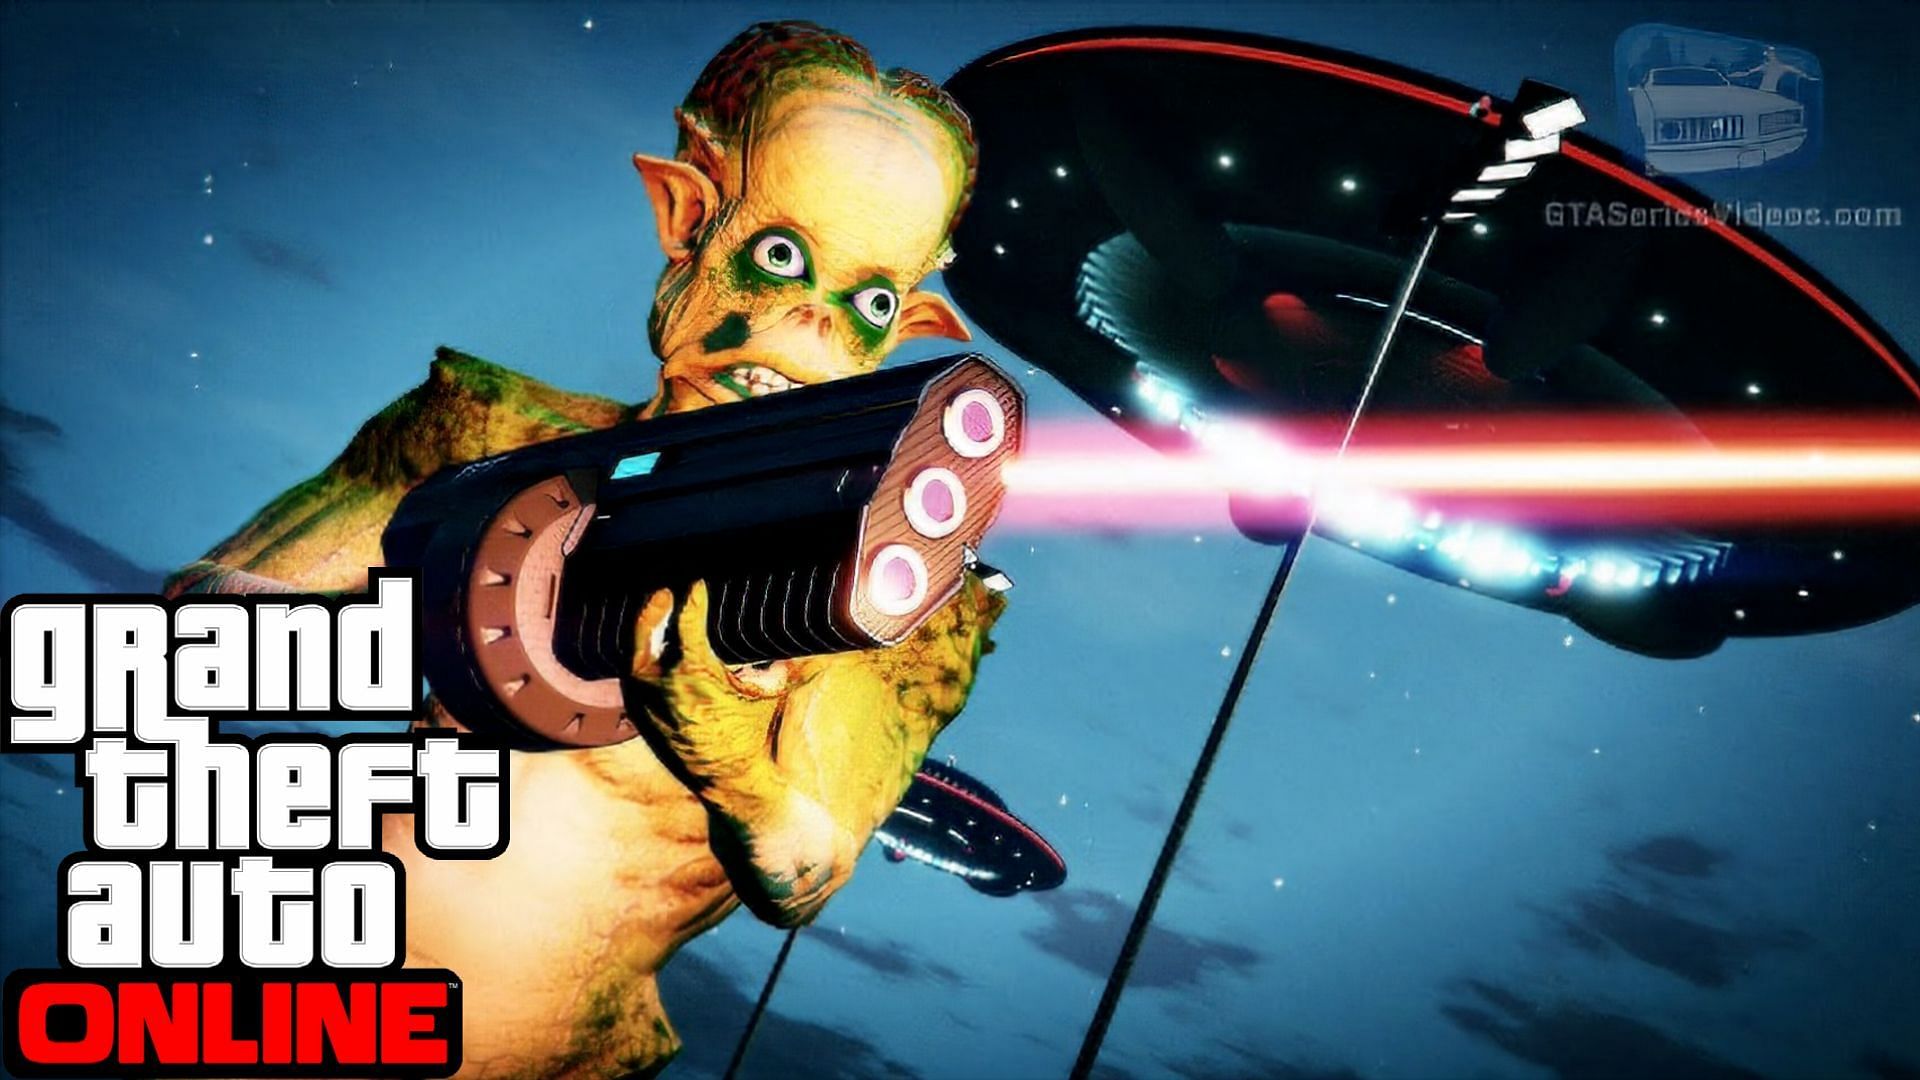 Alient Survival mode is back in GTA Online in the latest weekly update starting today. (Image via YouTube/GTA Series Videos)